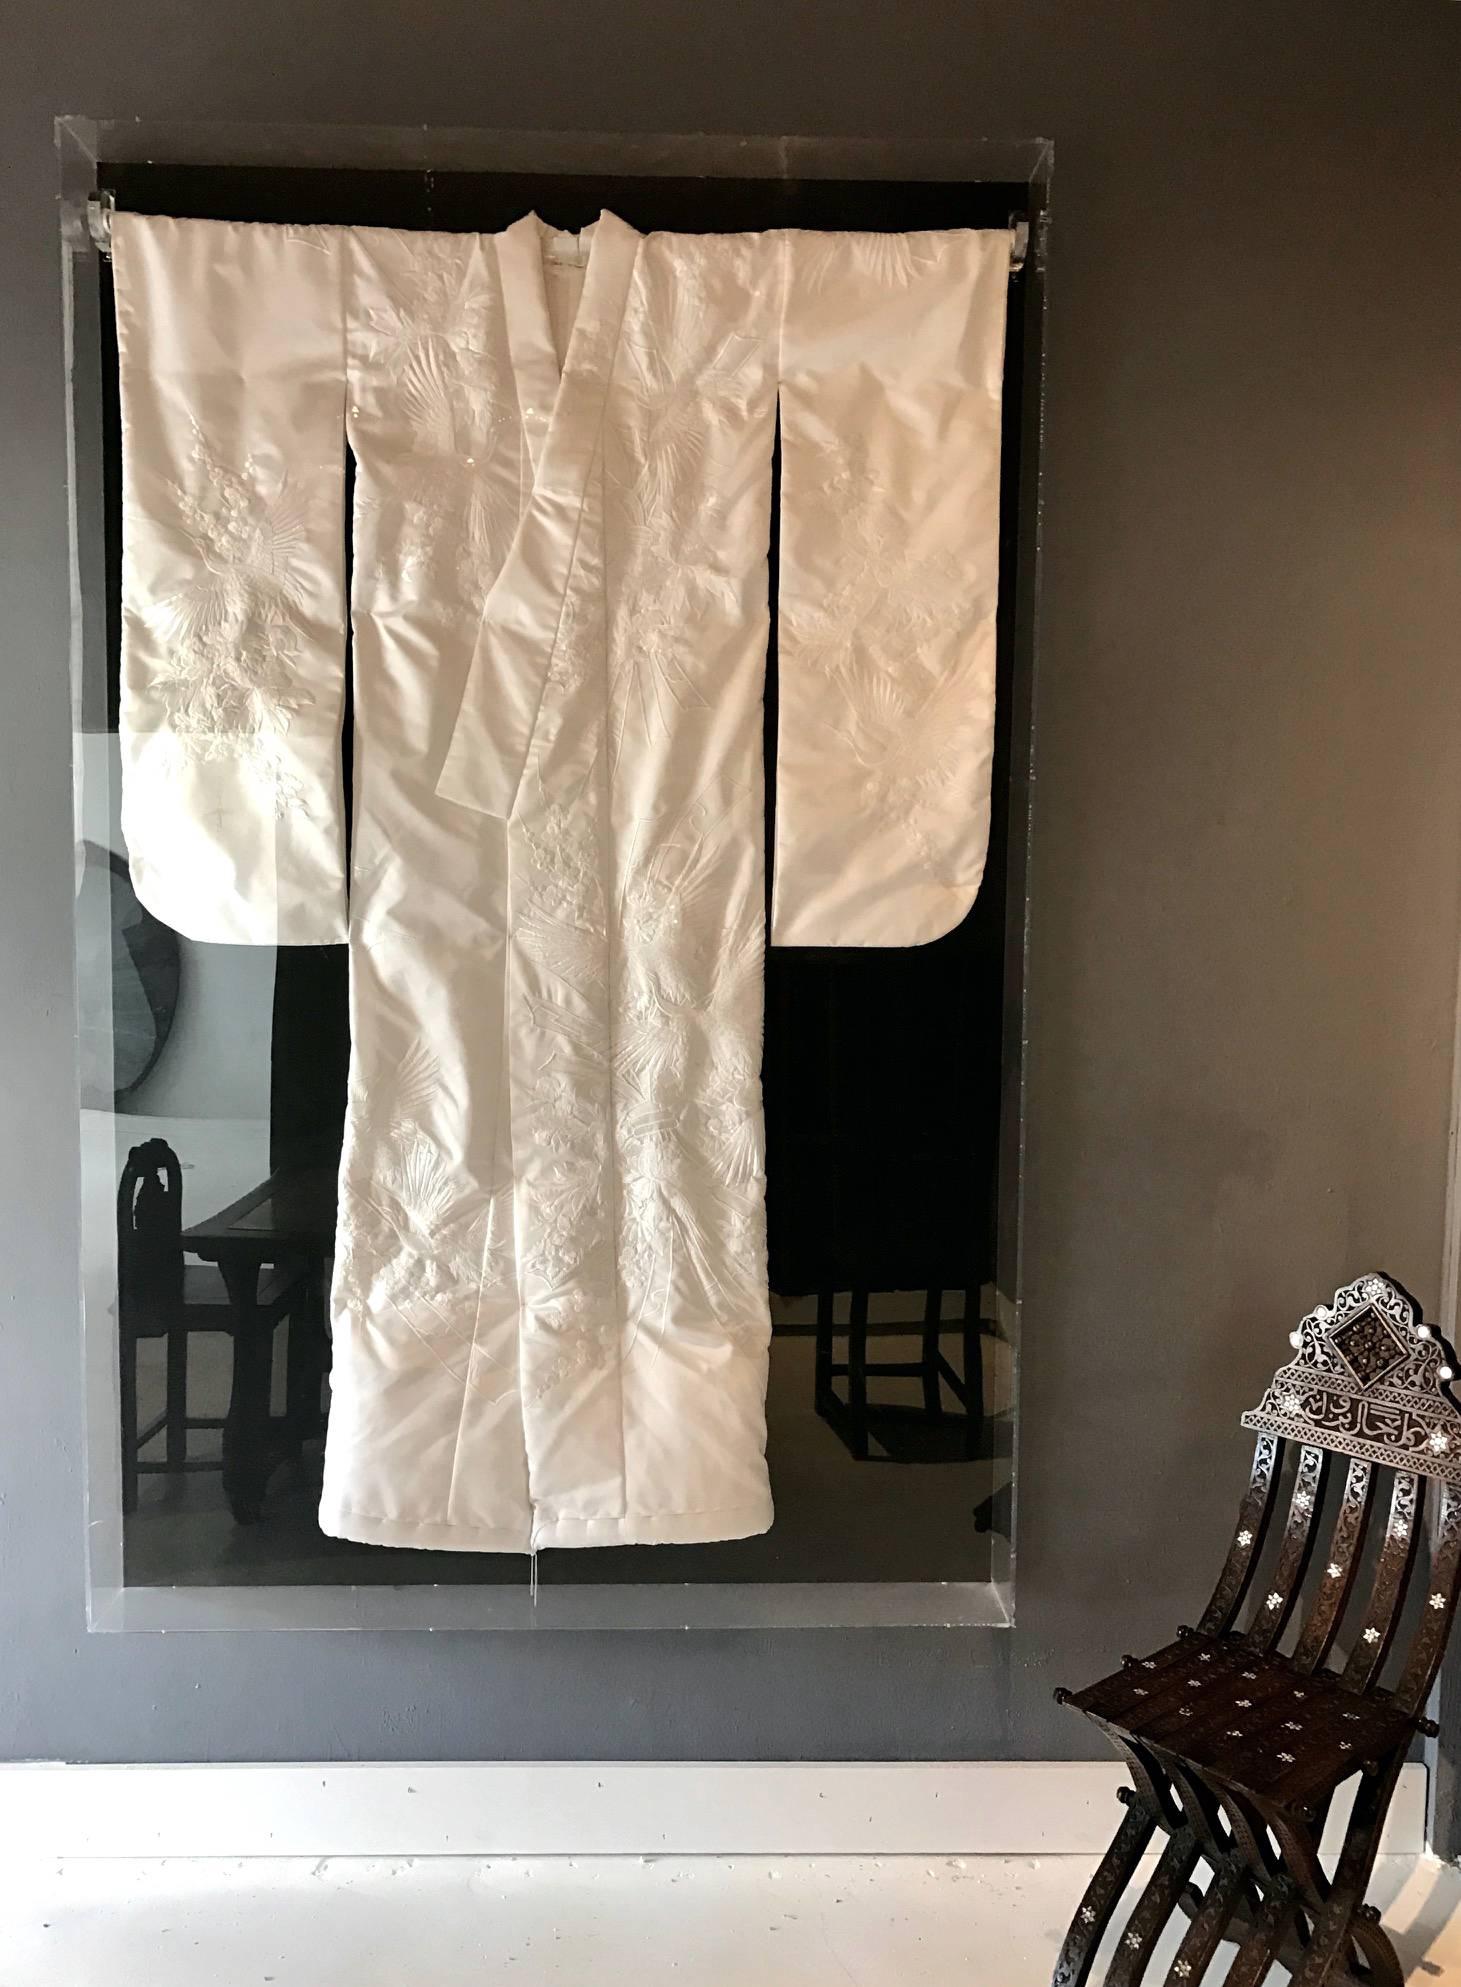 A vintage Japanese ceremonial kimono, circa 1940-1950, beautifully framed and displayed in a Lucite shadow box. An unusual white on white ceremonial piece in pure silk with intricate embroidery work that depicts cherry blossom, peony flowers, cranes